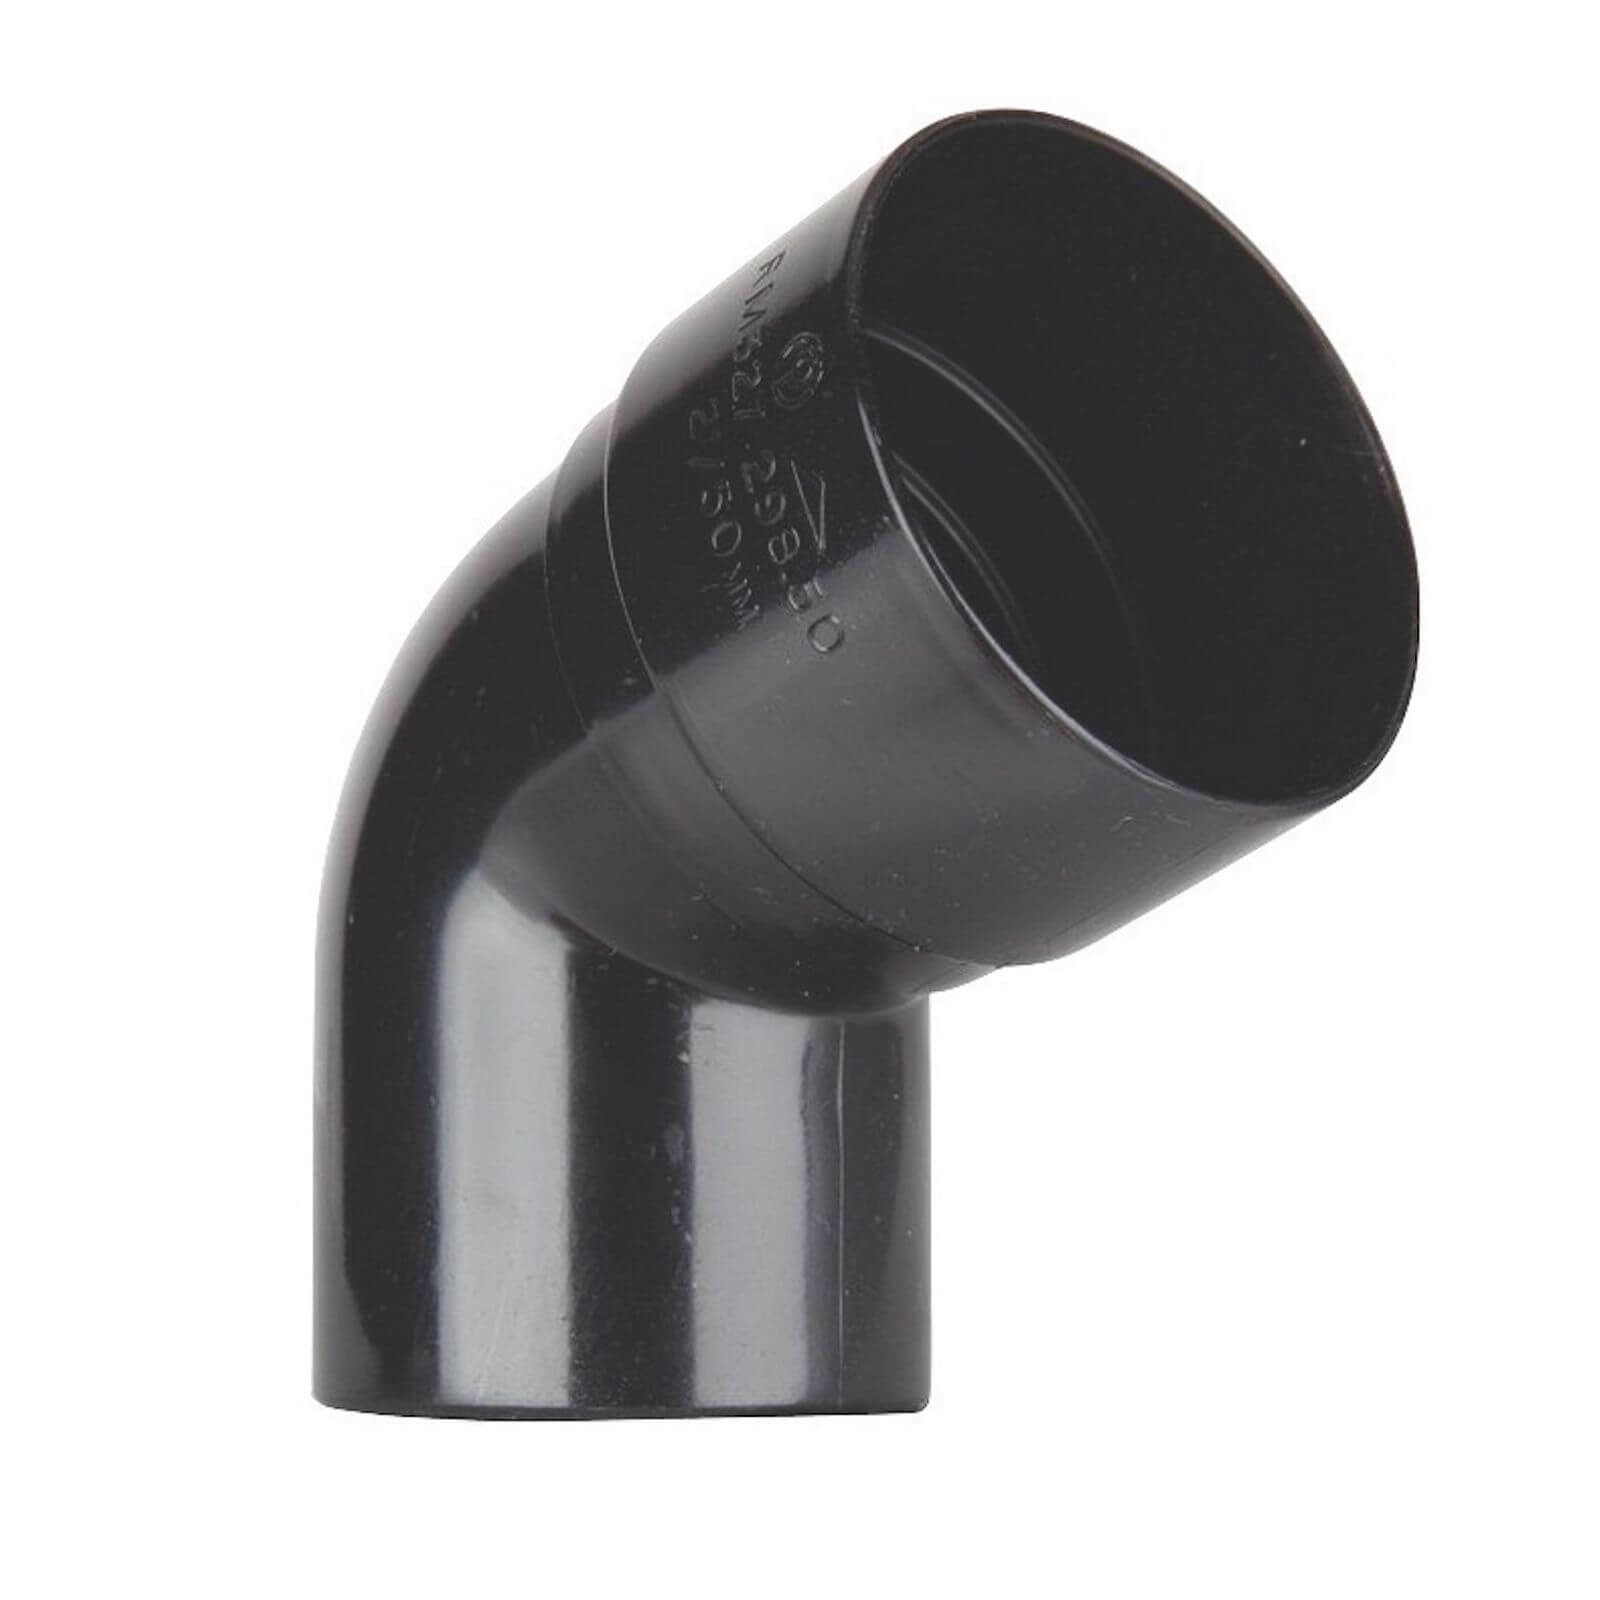 Polypipe Downpipe Offset Bend - 50mm x 112.5 Degree - Black